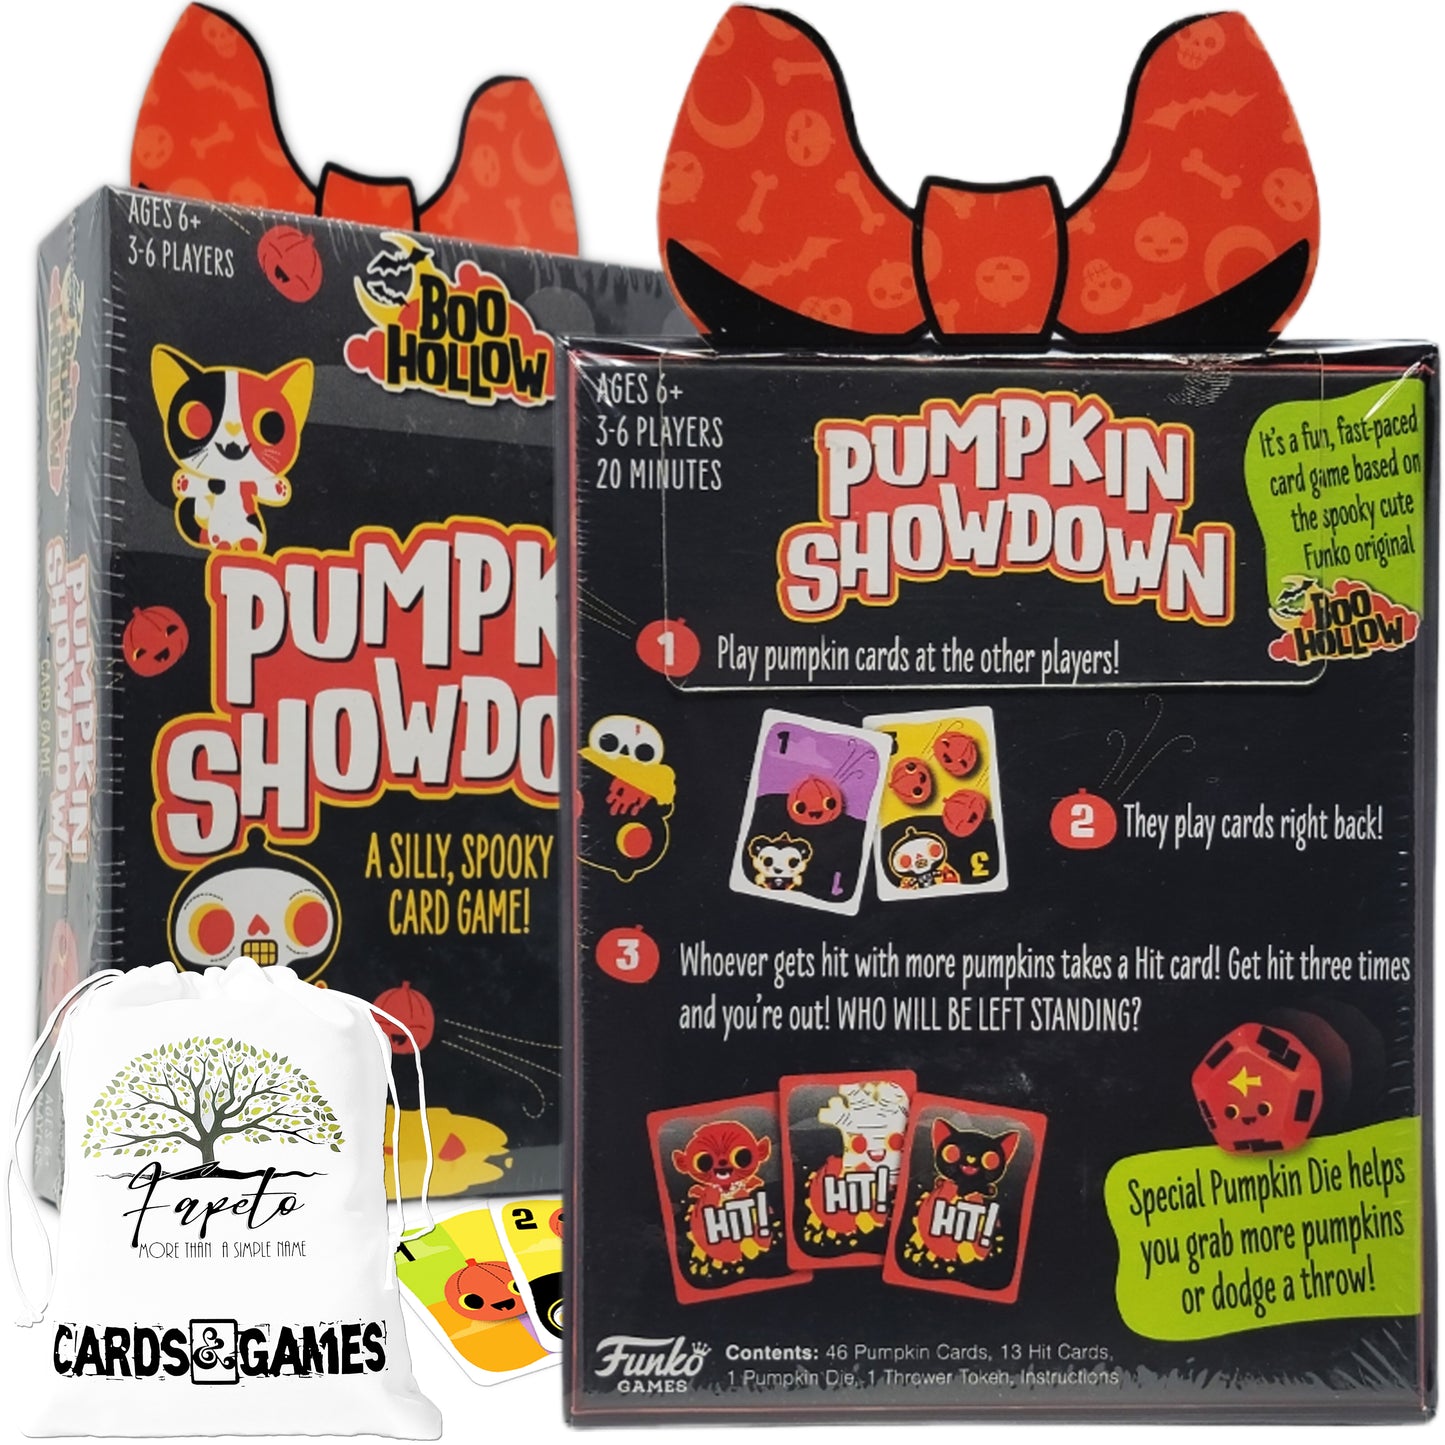 Family fast card game Gremlins - Holiday Havoc and Boo Hollow - Pumpkin Showdown with Random Color Drawstring Bag for party, travels and holidays